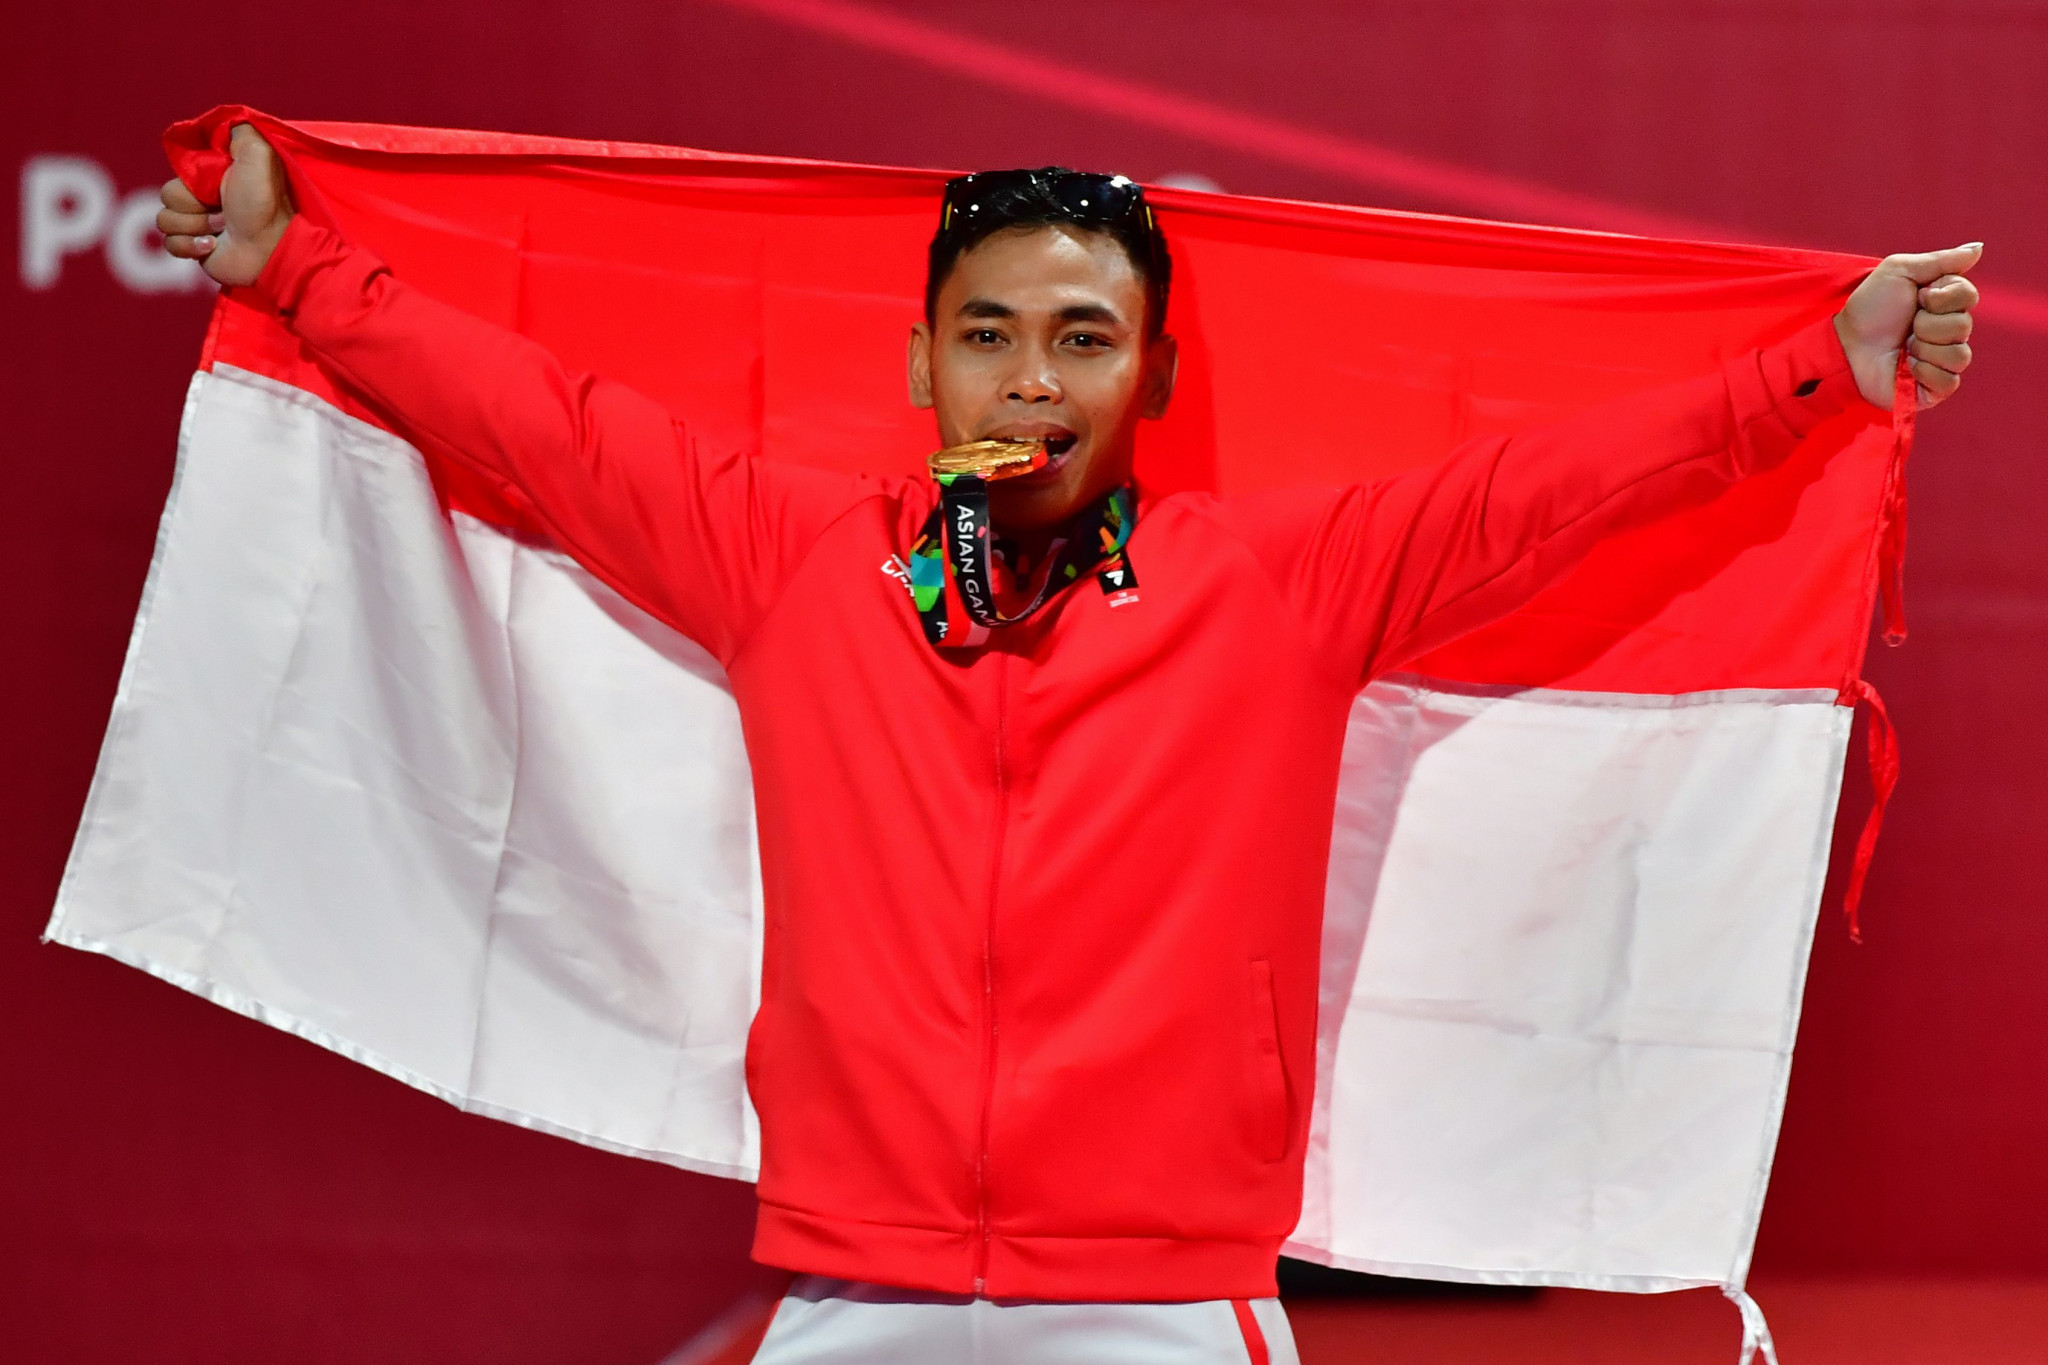 Indonesia has targeted success in weightlifting at Tokyo 2020 ©Getty Images